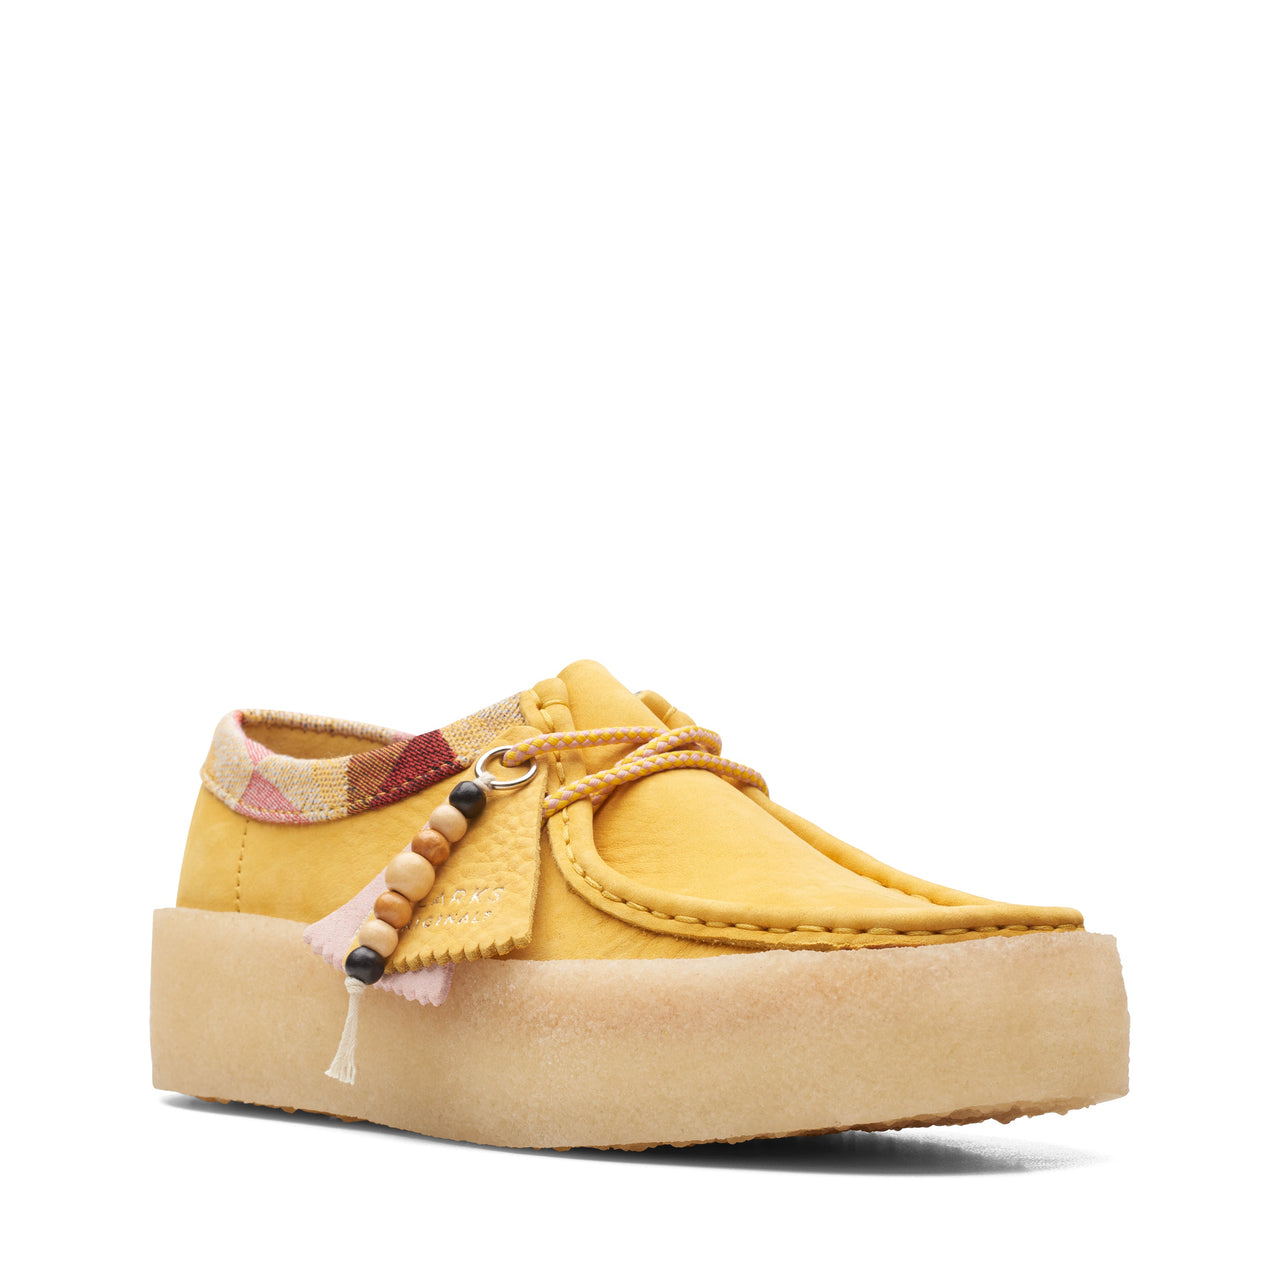  Stylish and comfortable women's shoes in yellow nubuck 